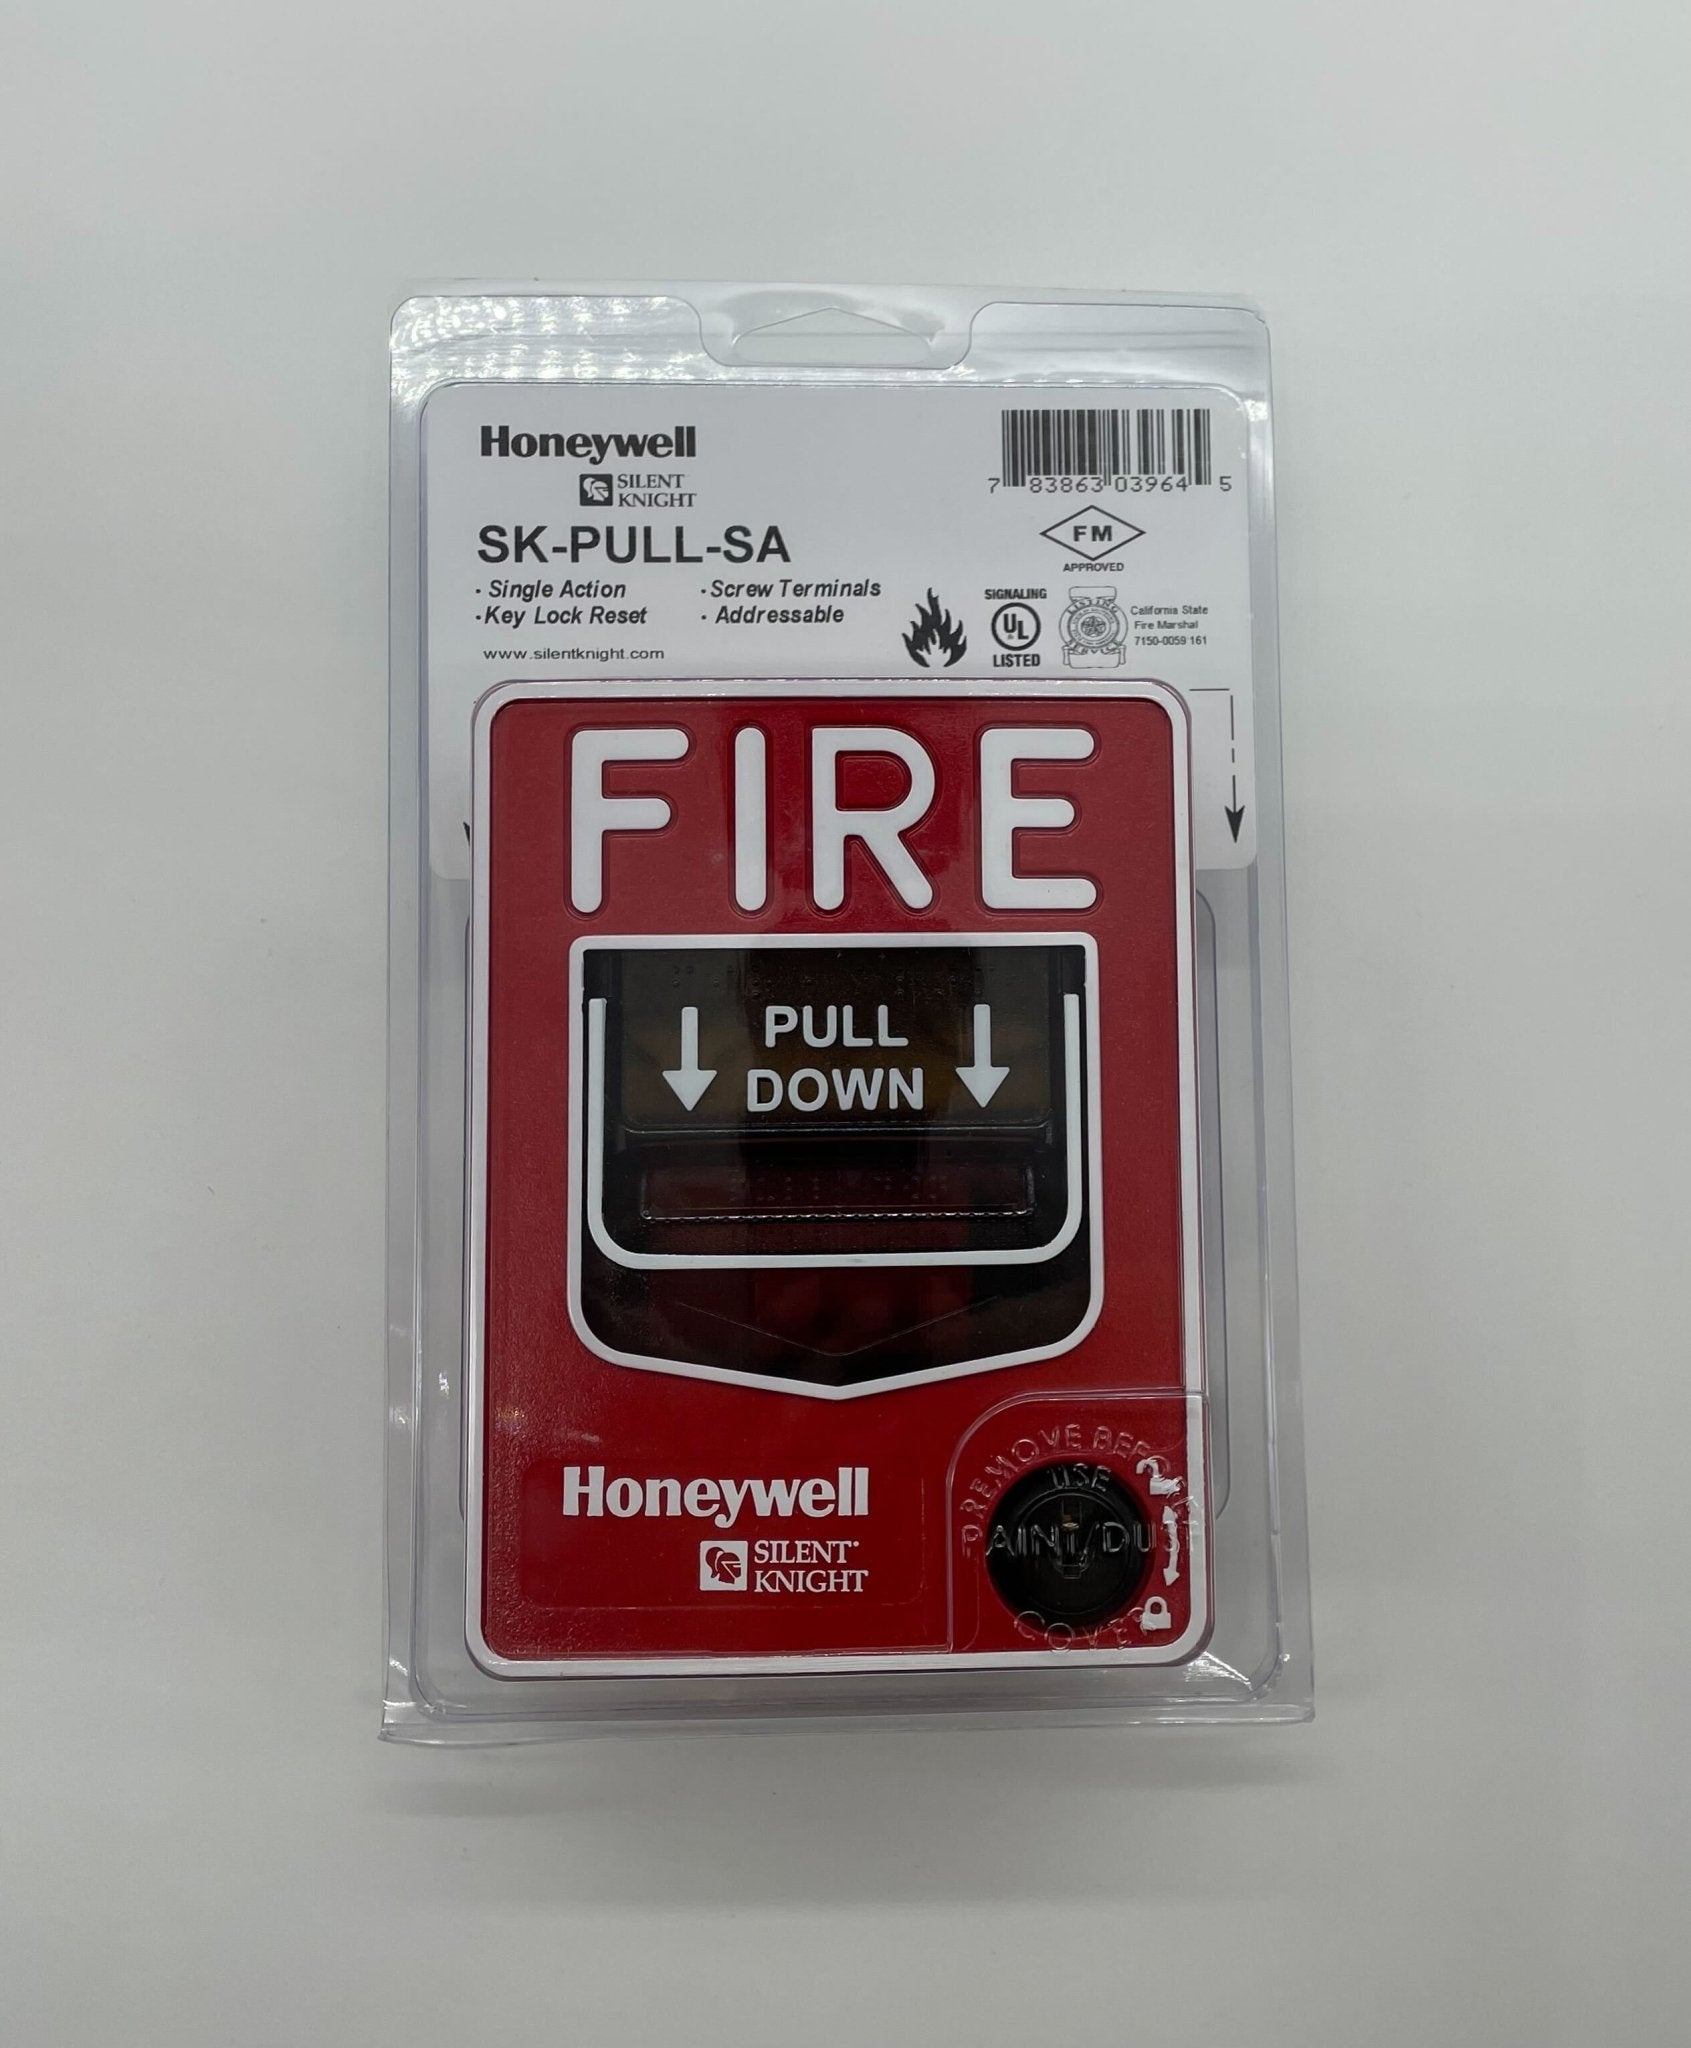 Silent Knight SK-PULL-SA Single Action Pull Station - The Fire Alarm Supplier